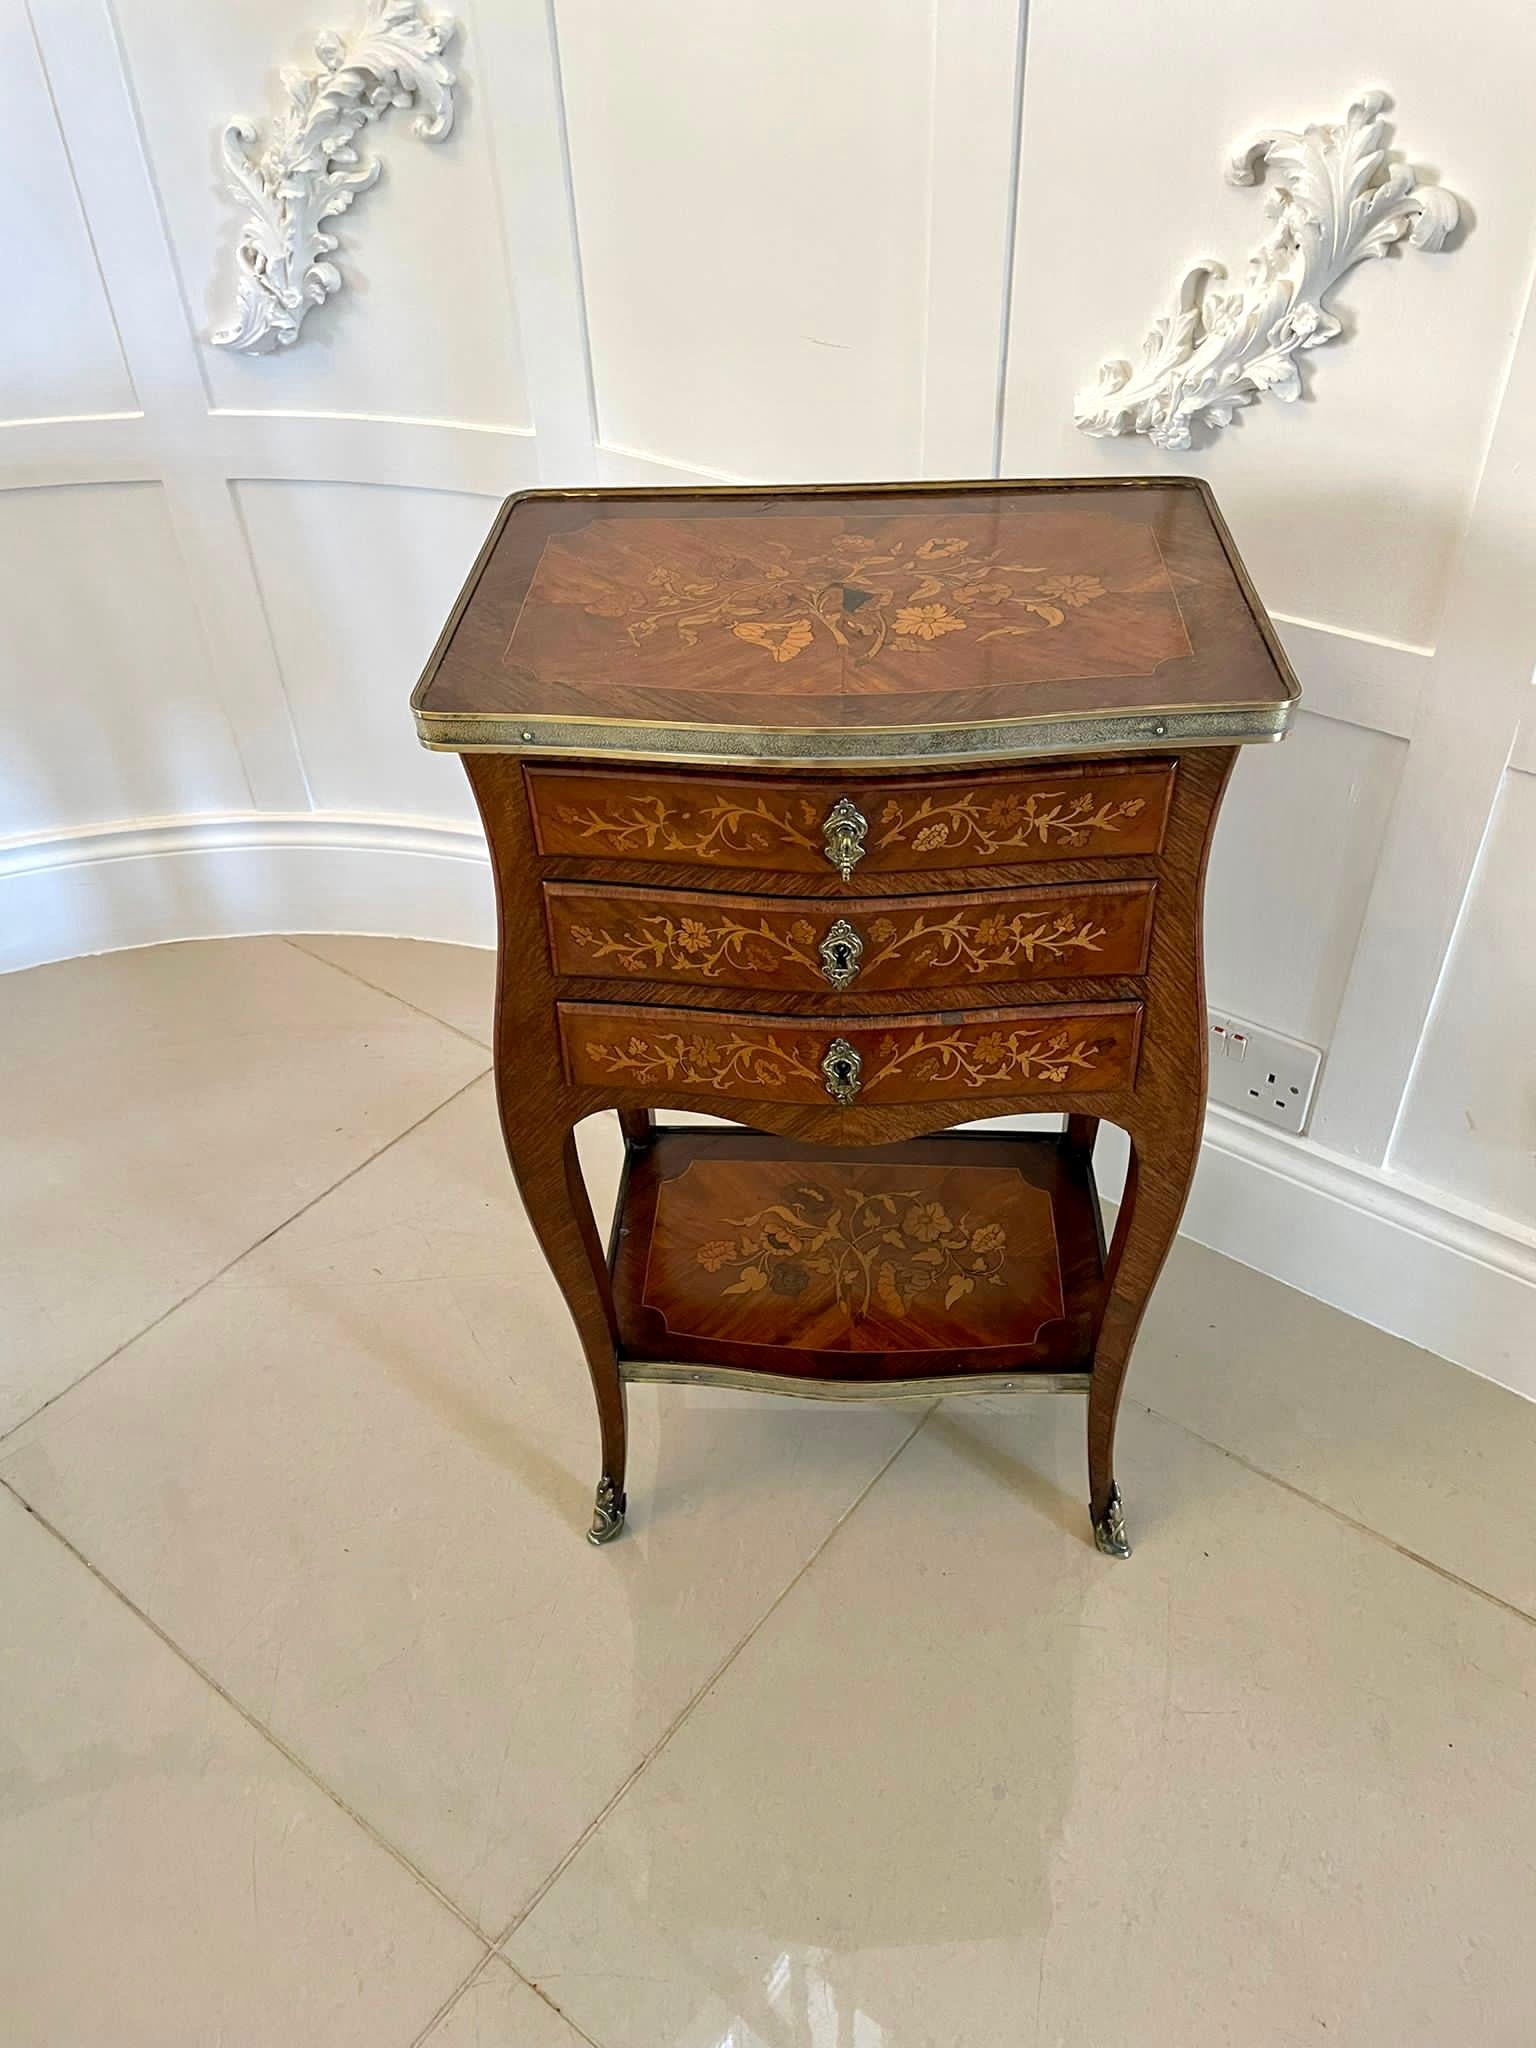 Victorian Antique Freestanding Quality Marquetry Inlaid Kingwood Chest of Drawers For Sale